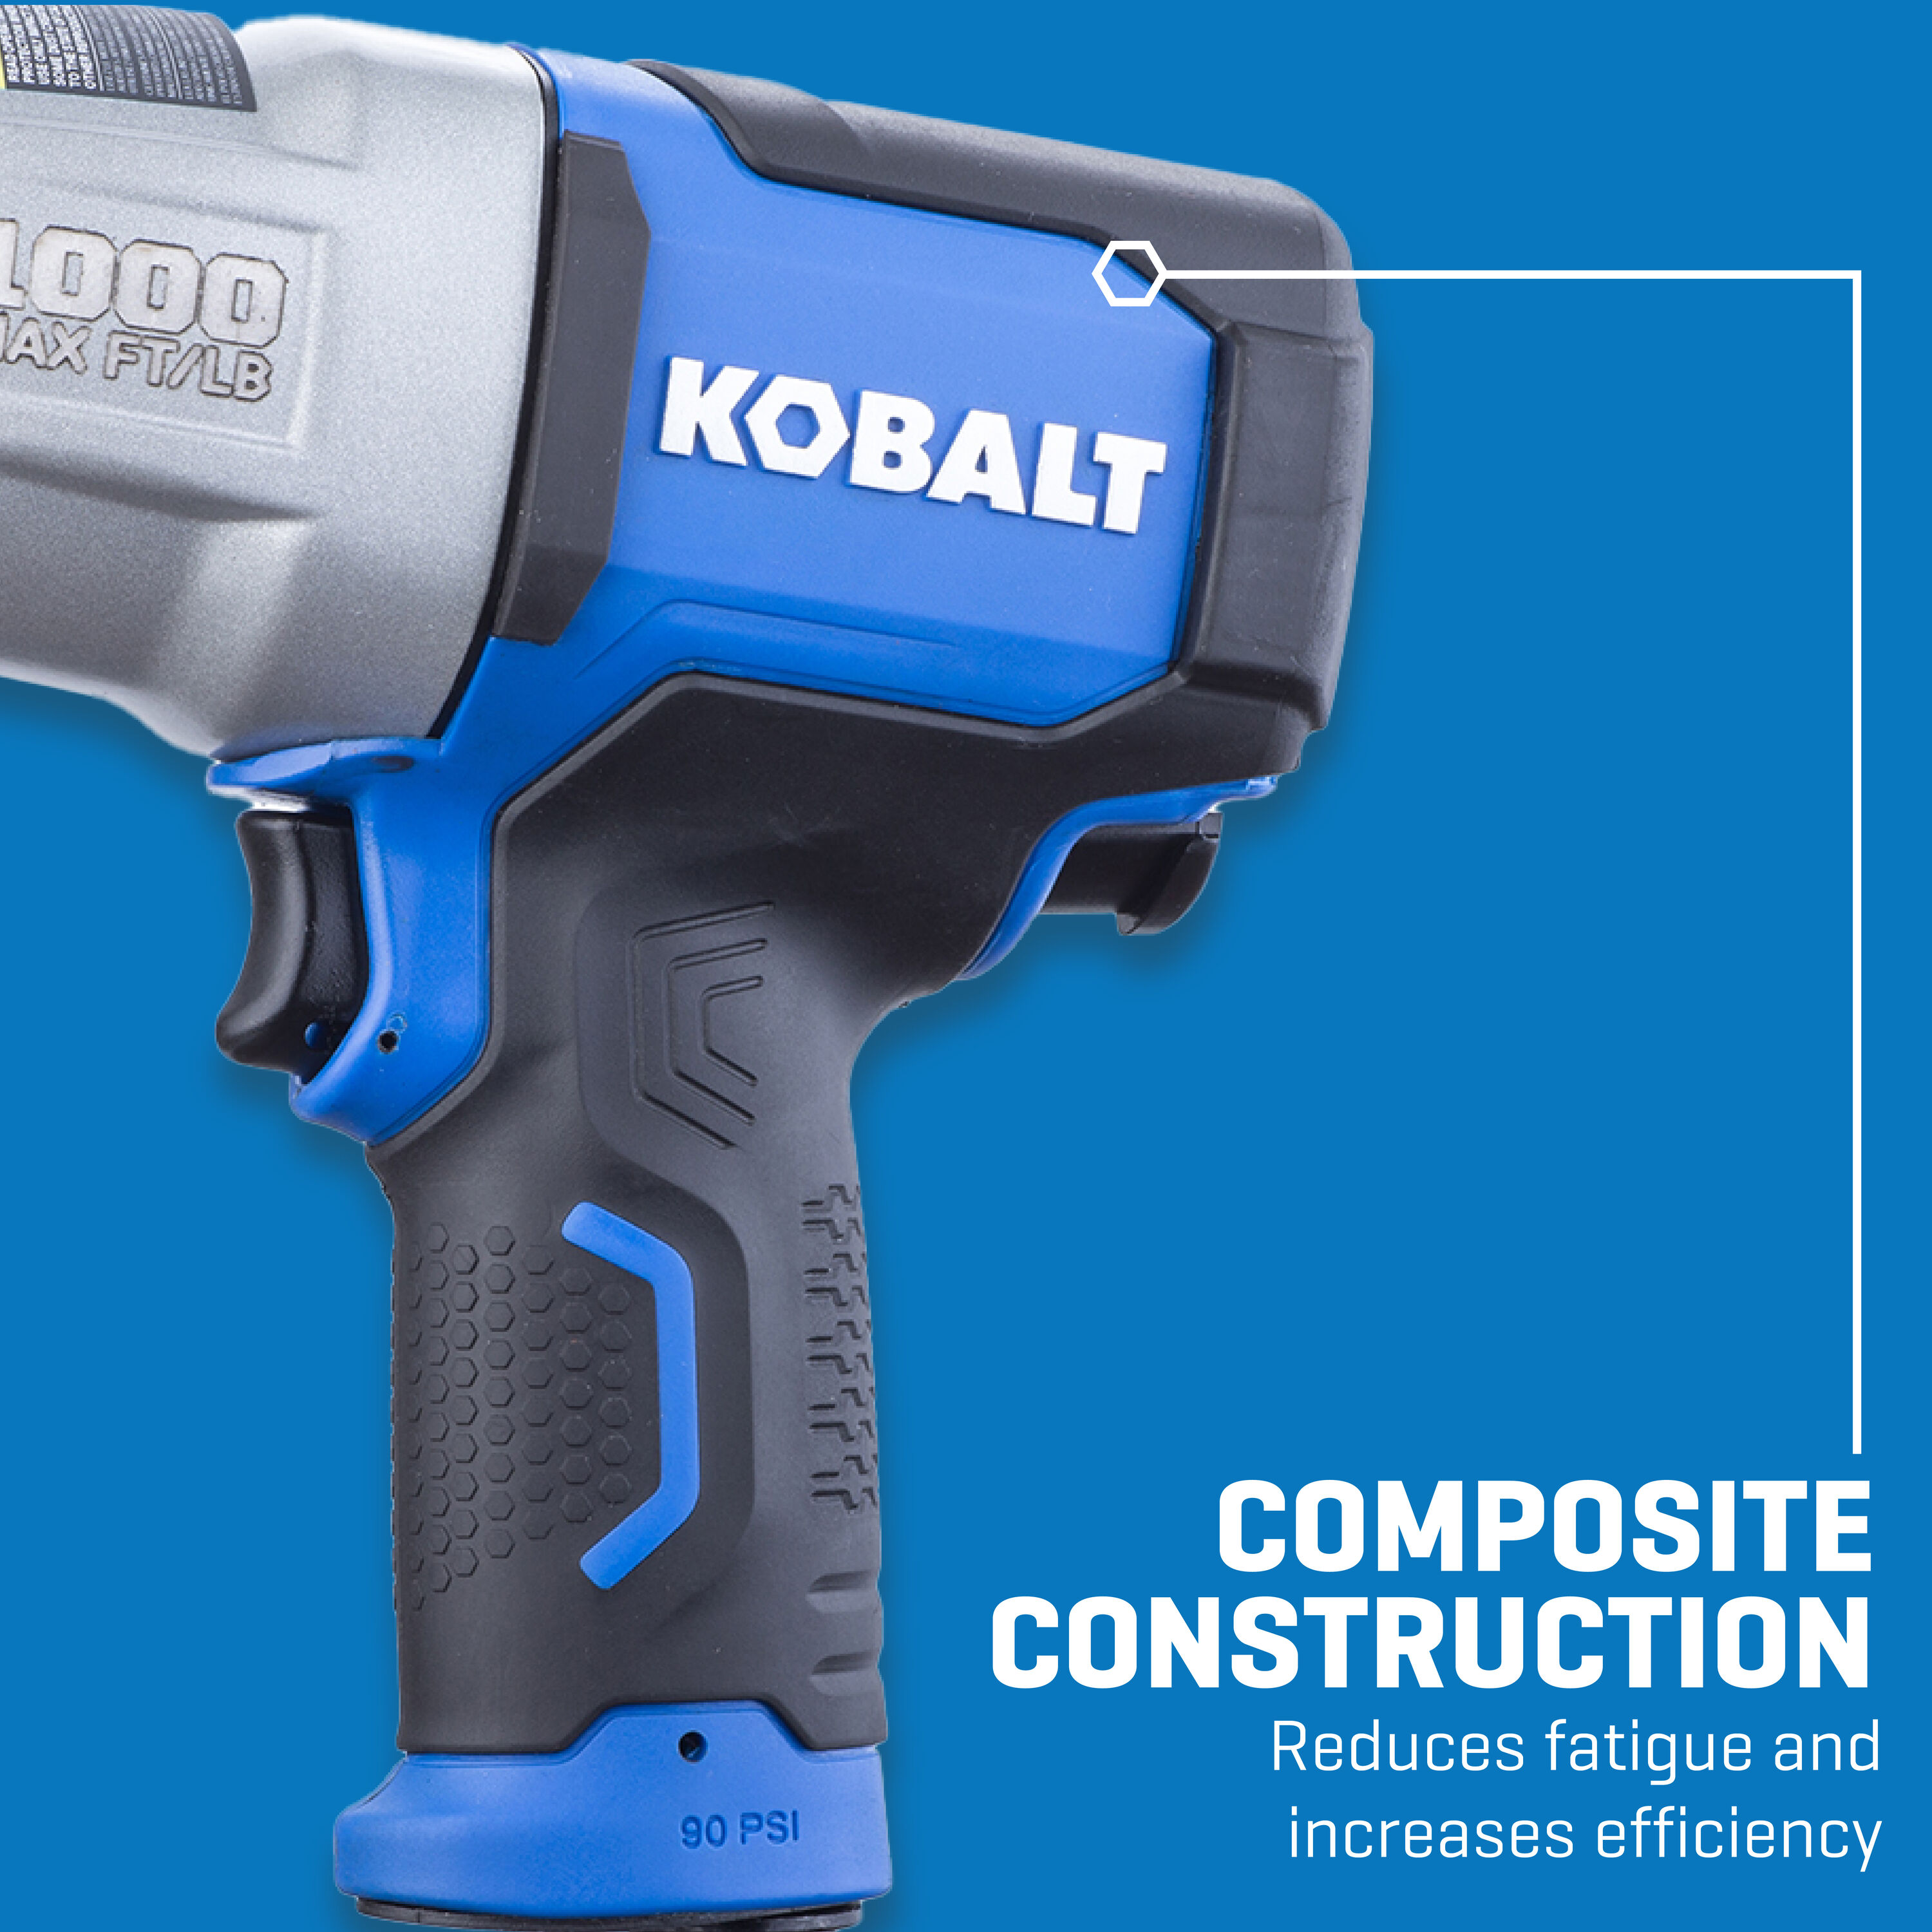 Kobalt 0.5-in 1000-ft lb Air Impact Wrench in the Air Impact